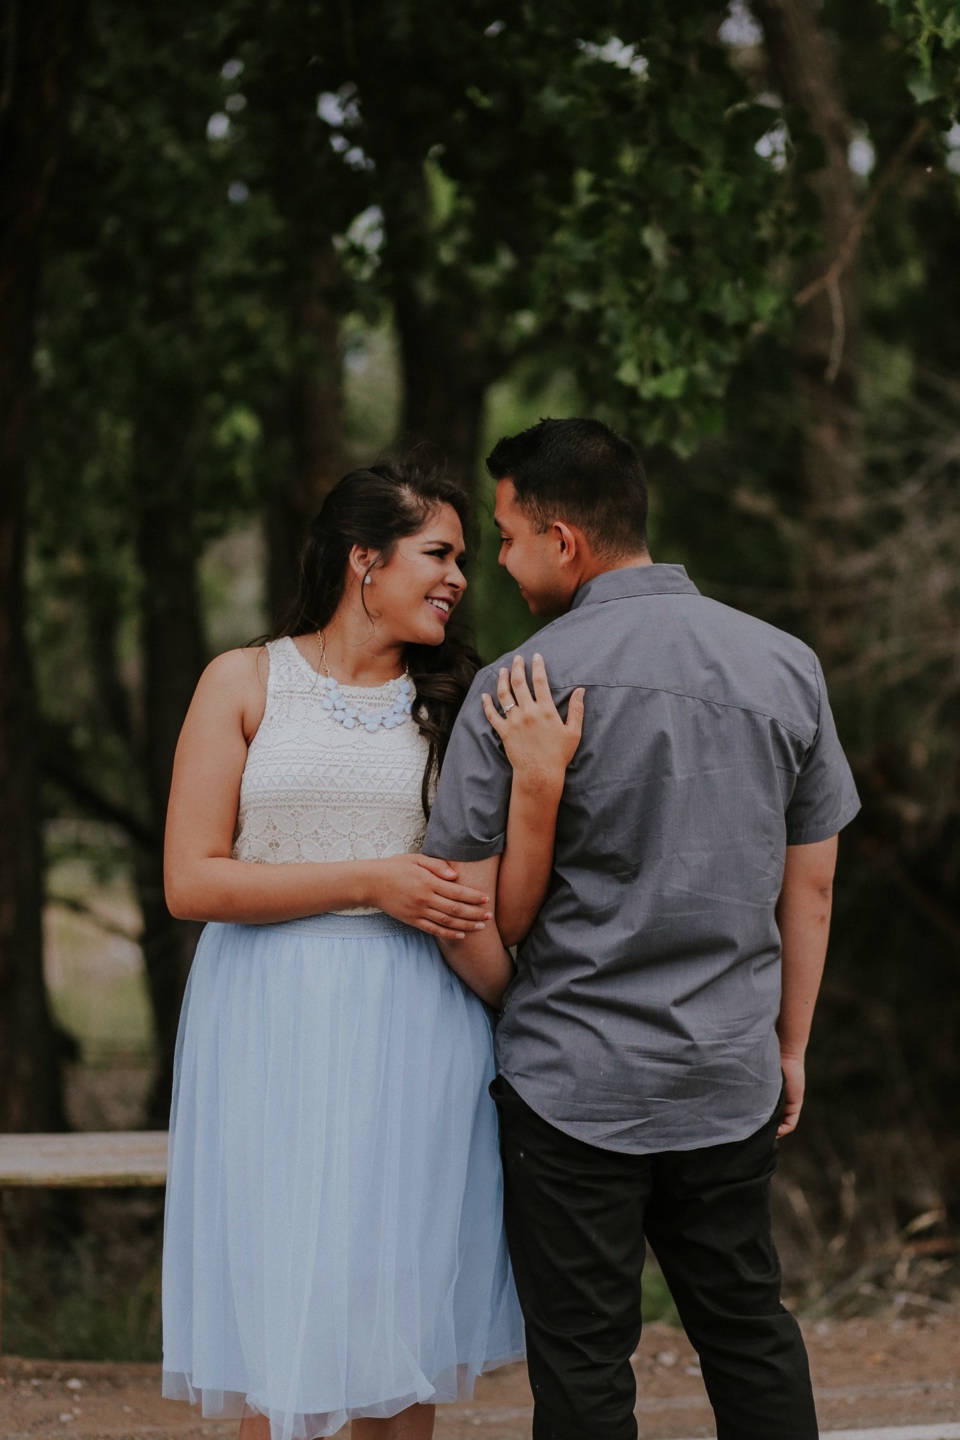  I had a blast capturing Isamar and Rafael’s Albuquerque engagement photos on a beautiful July day. The love Isa and Rafy have for one another is incredible and having the beautiful Albuquerque, New Mexico landscape as a backdrop was perfect! The Alb